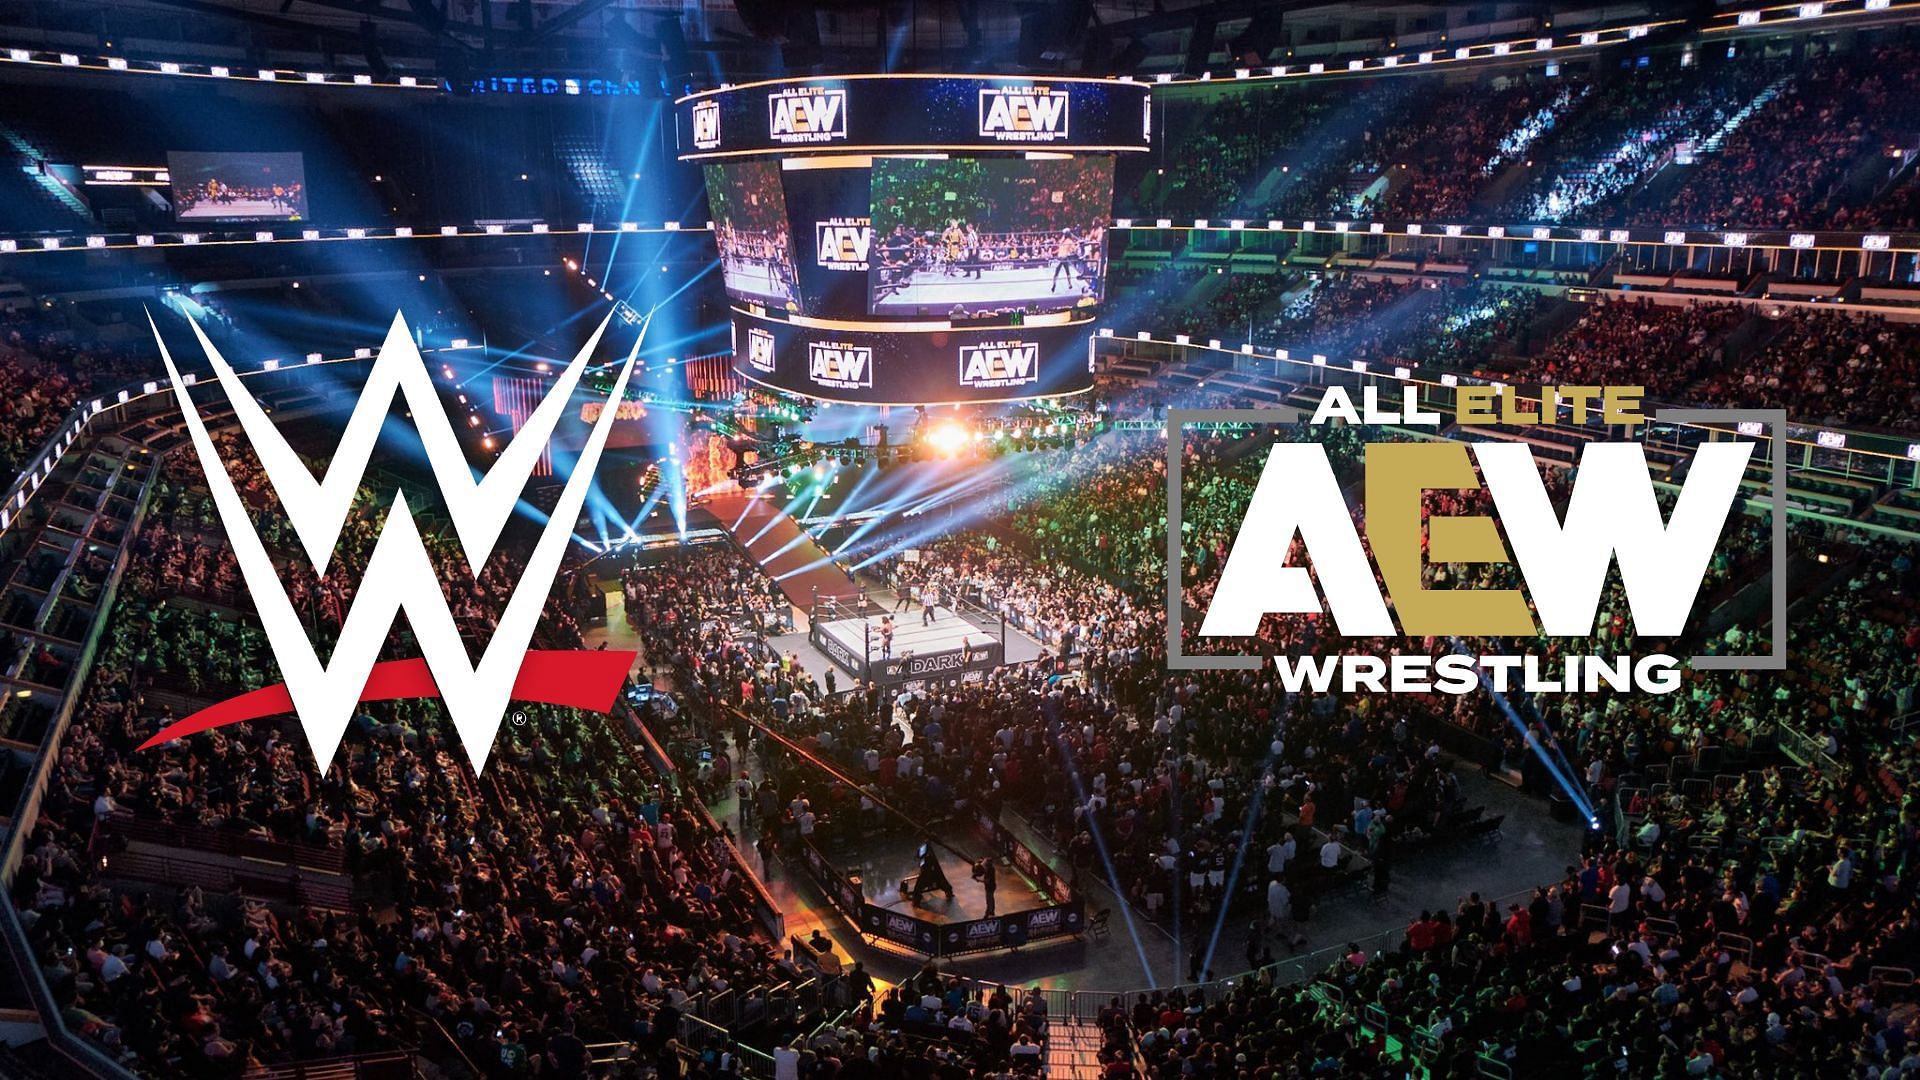 Which former WWE Superstar recently debuted for AEW?